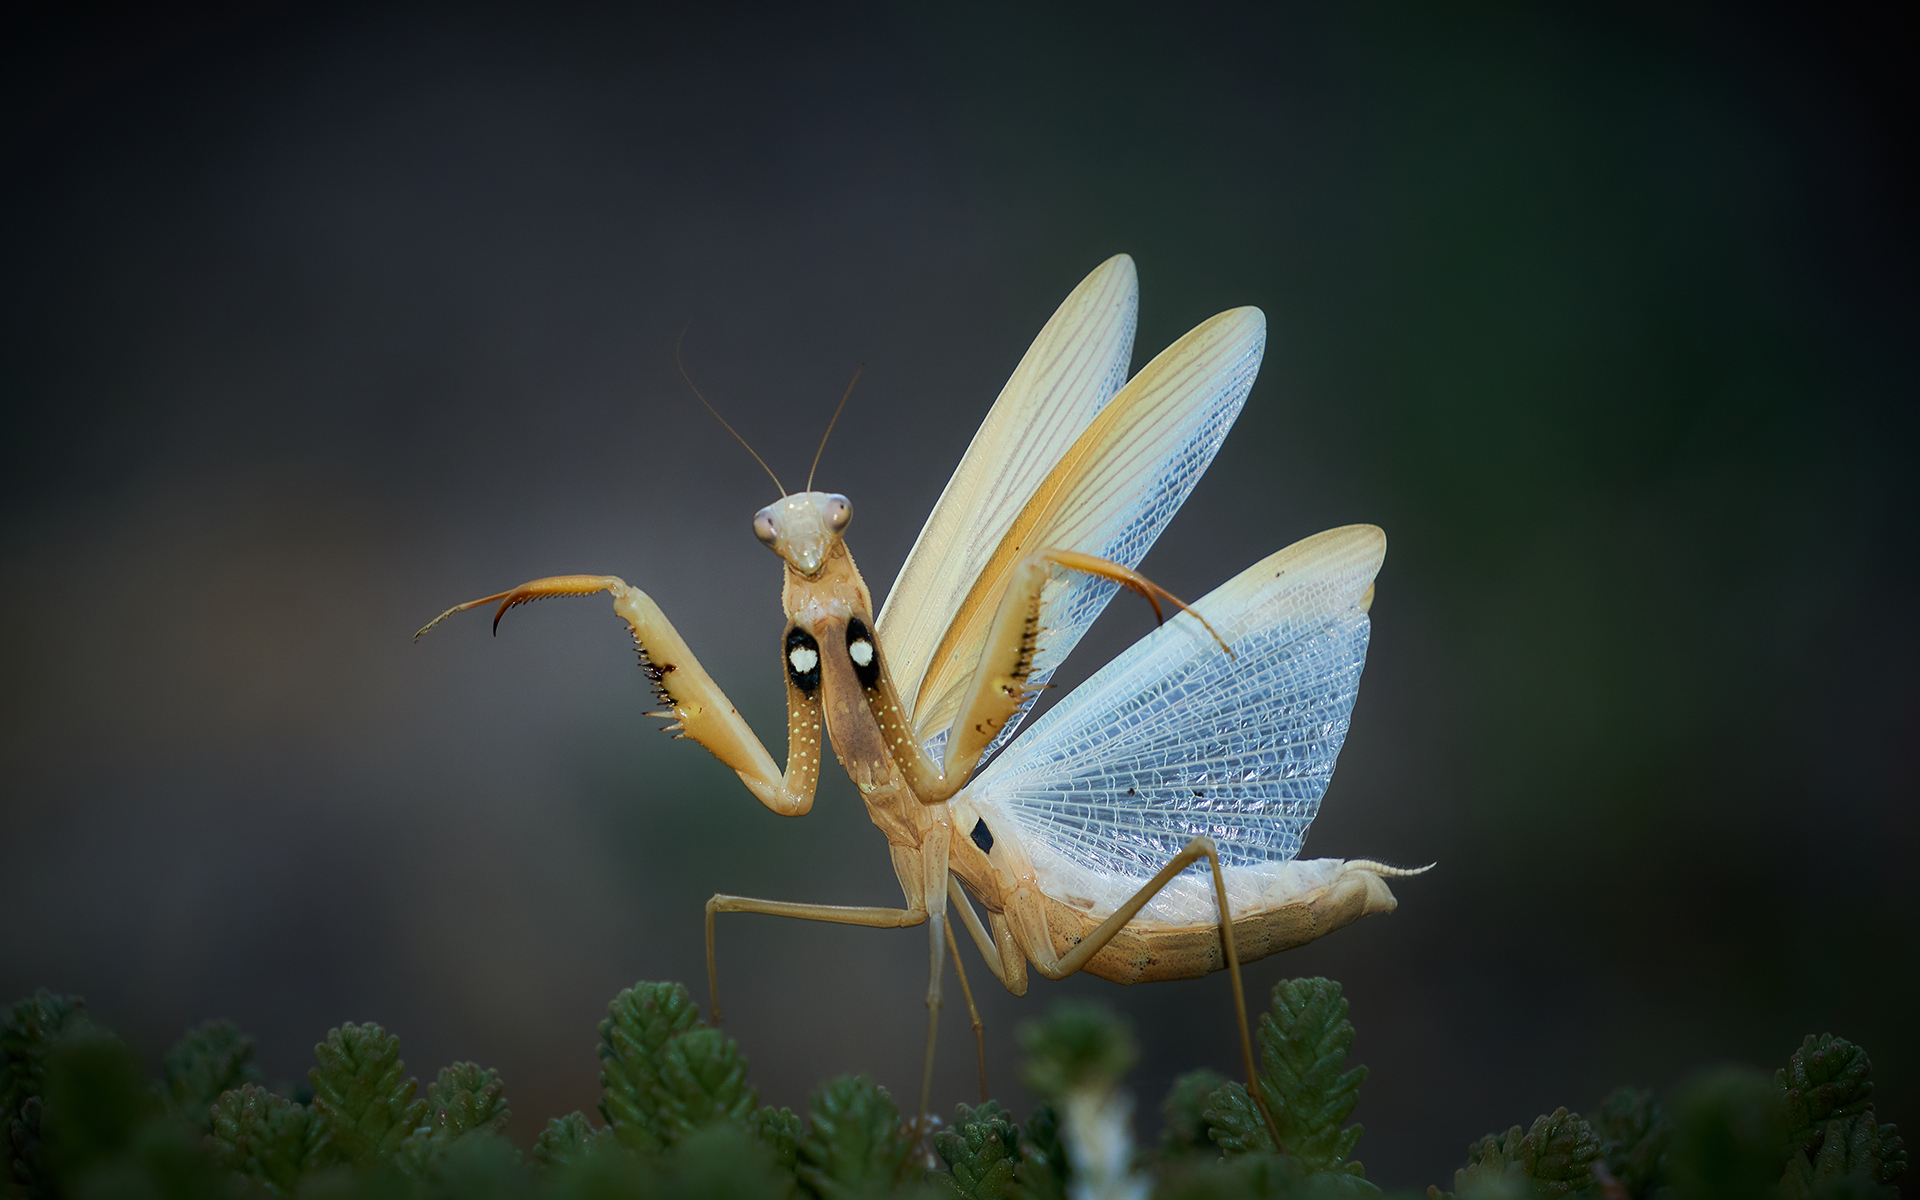 Ready to fight - mantis 0.09.19...